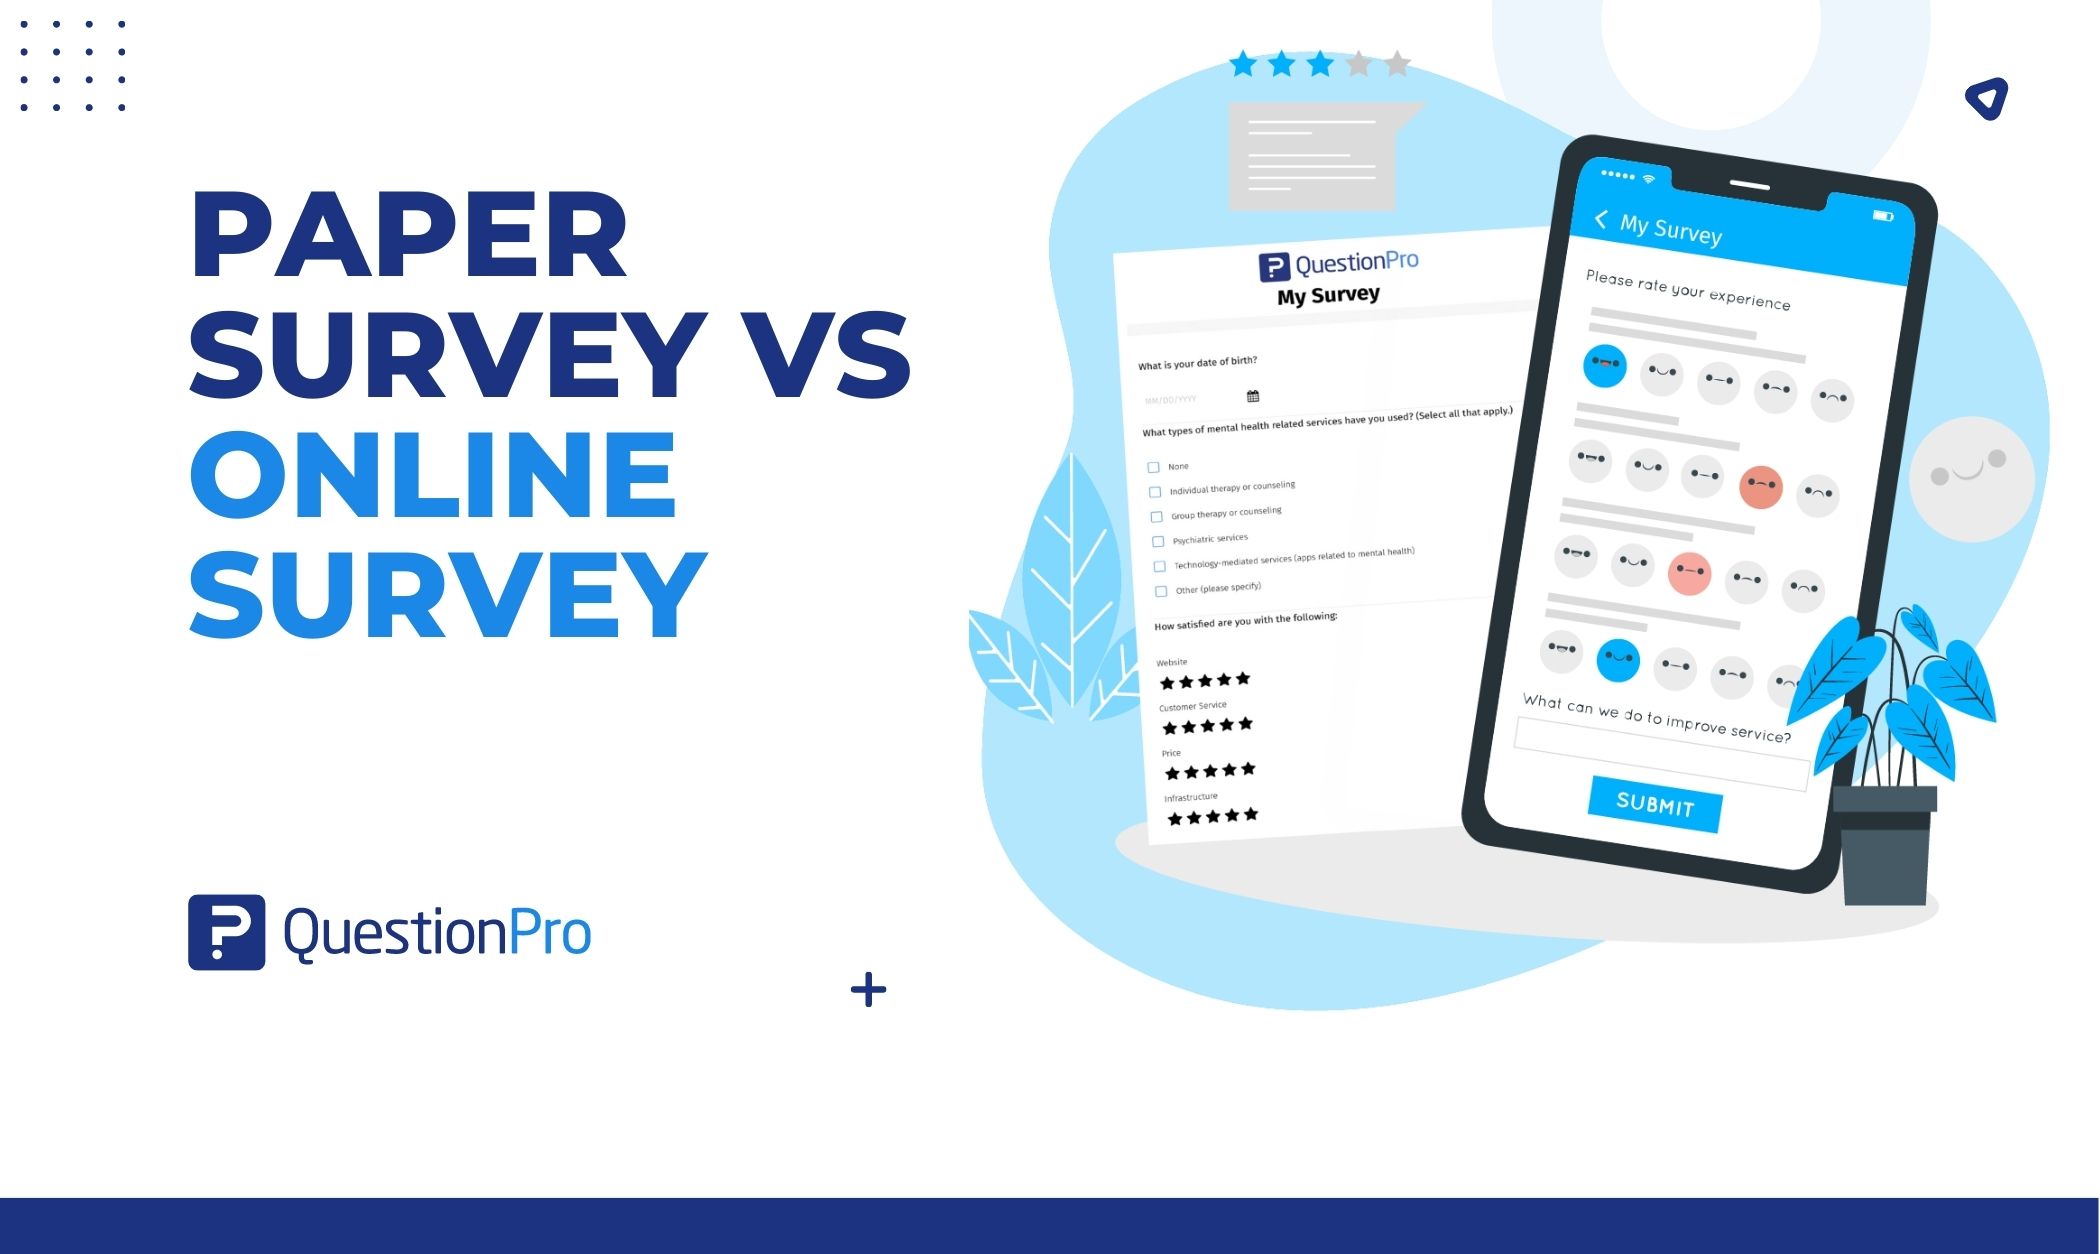 Both a paper survey vs online survey have pros and cons. Learn the comparative difference and choose the effective one to meet your needs.